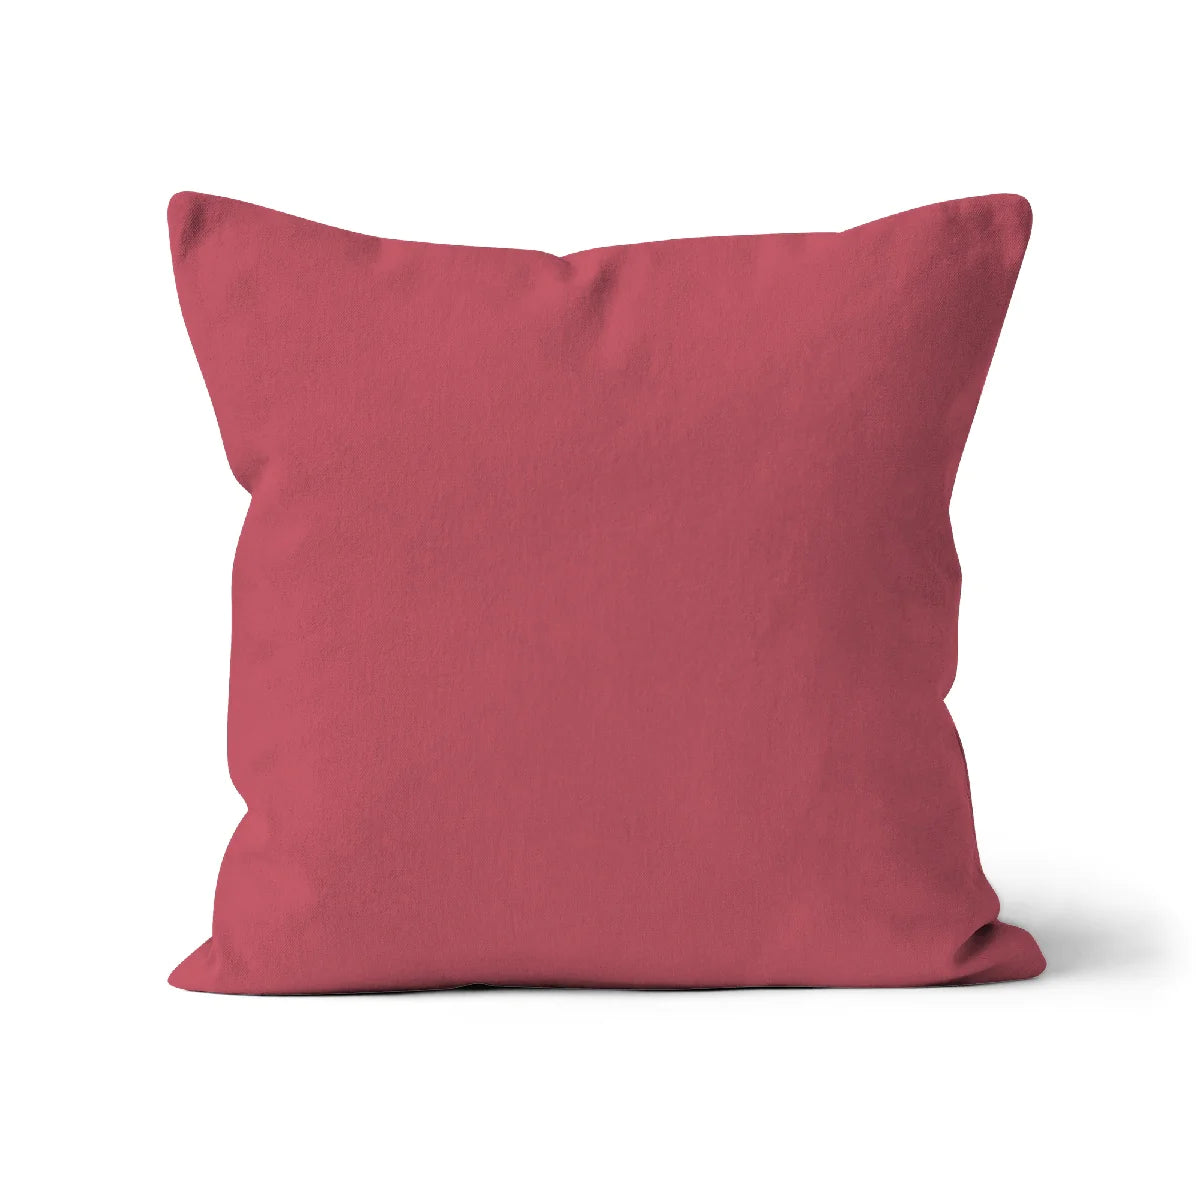 Sustainable and eco-friendly, this UK-made soft brick pink colour cushion cover is made to order from high-quality 100% organic cotton. The unfilled square-shaped cushion cover in a dark pink hue makes it a versatile and stylish homeware accessory to any interior decor theme. Machine washable for easy cleaning.